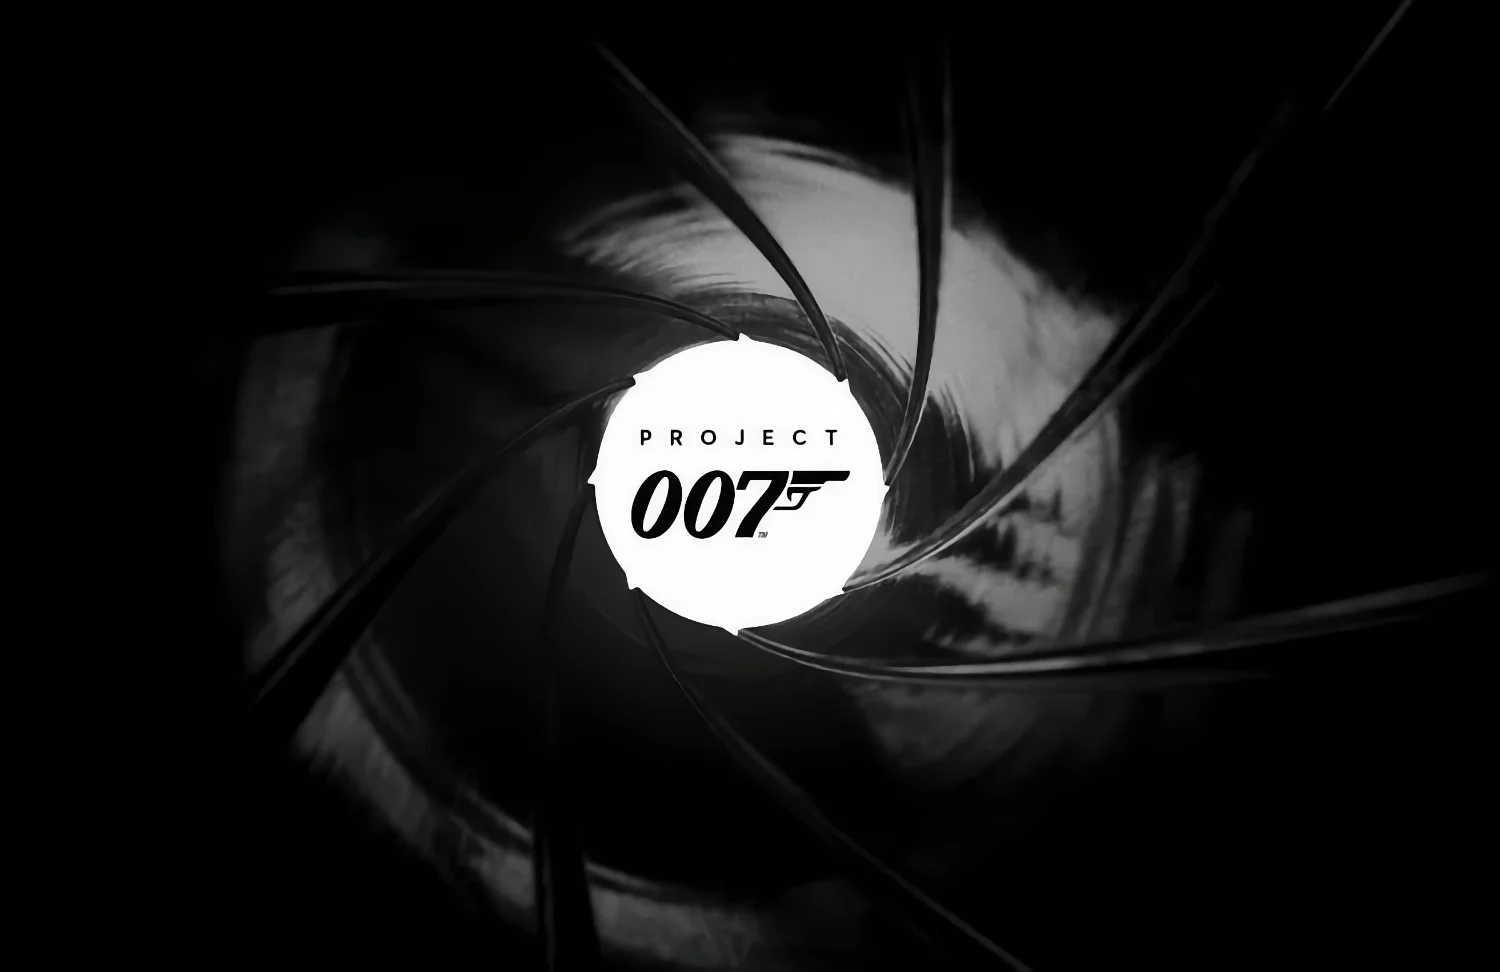 Teaser image for an upcoming James Bond game from IO Interactive. It shows the classic Bond sights image with the text “Project 007” in the center.